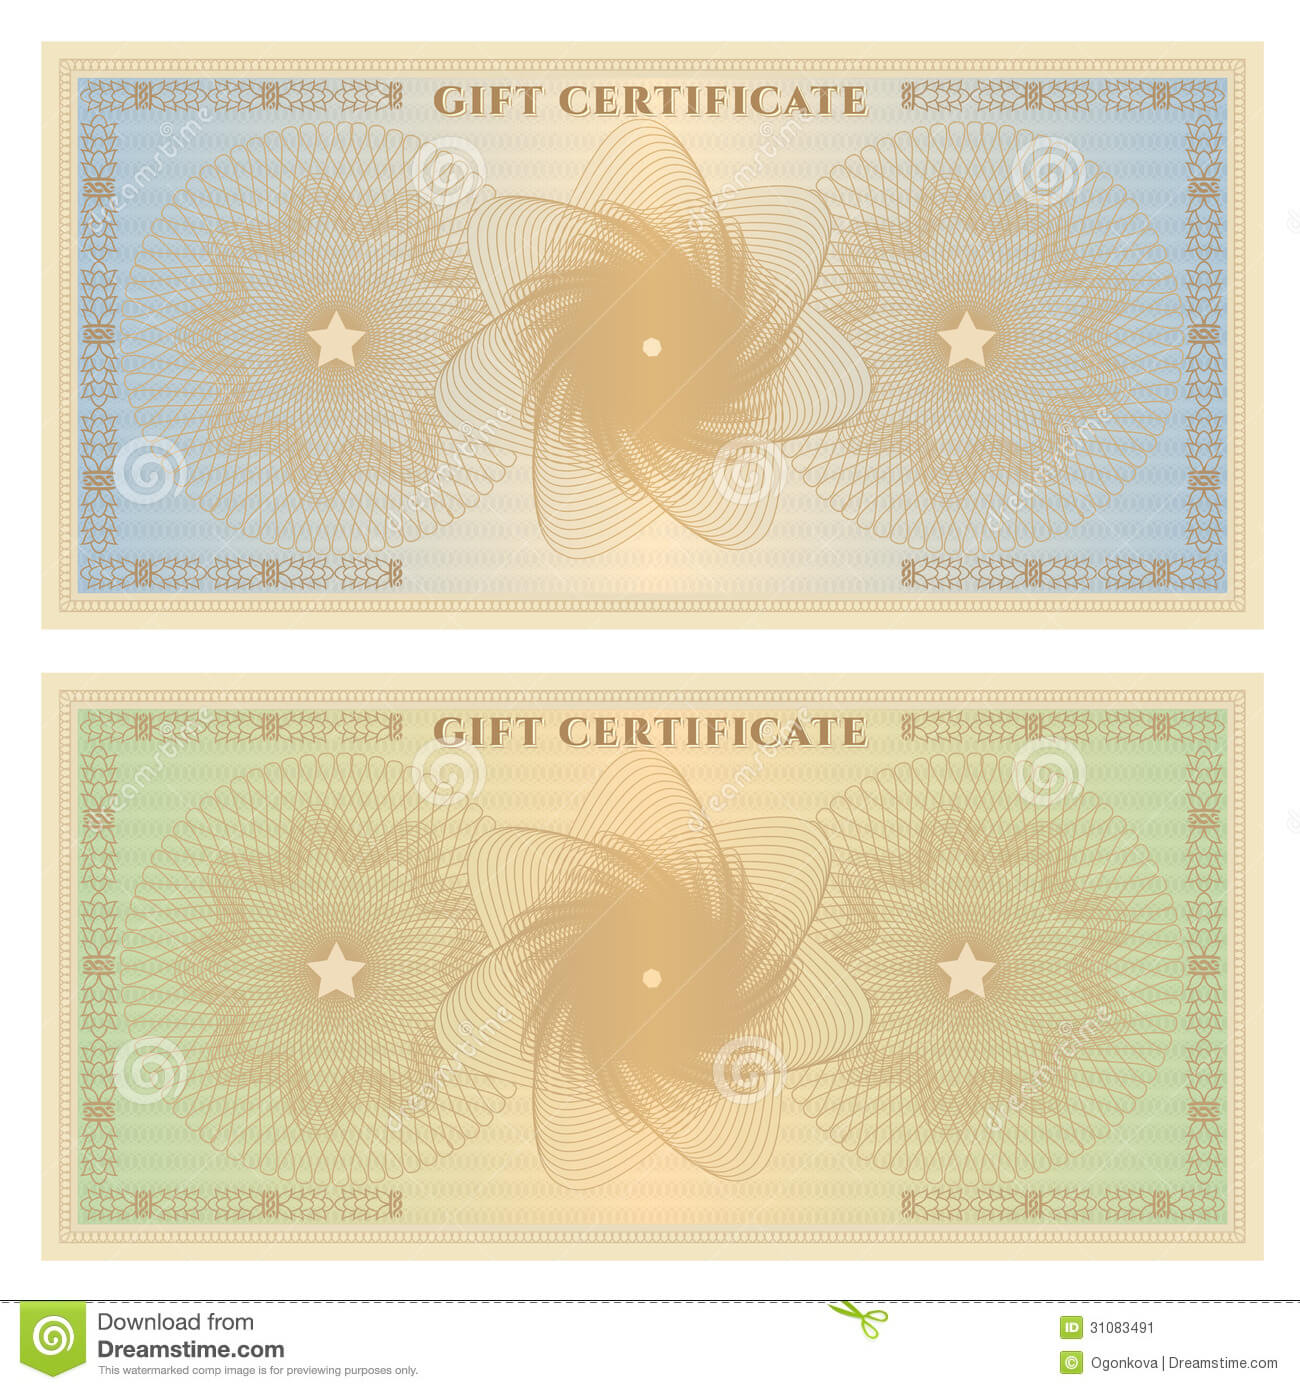 Gift Certificate (Voucher) Template With Borders Stock In This Certificate Entitles The Bearer To Template